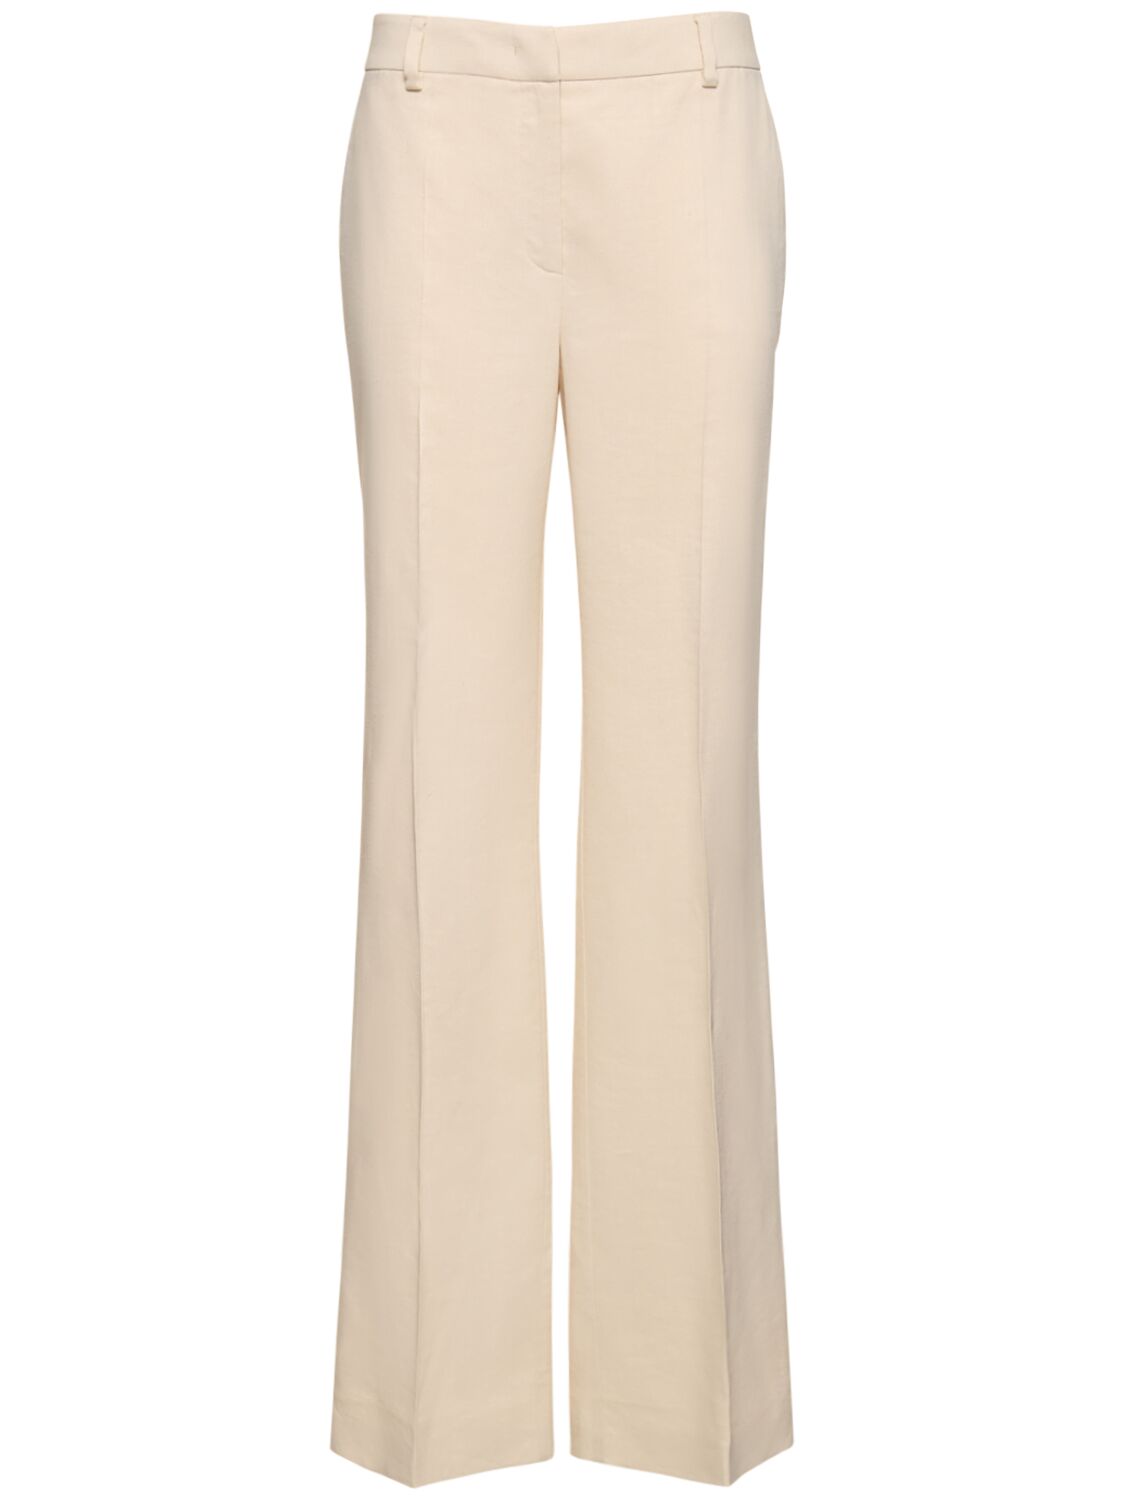 Image of Viscose & Linen Twill Flared Pants